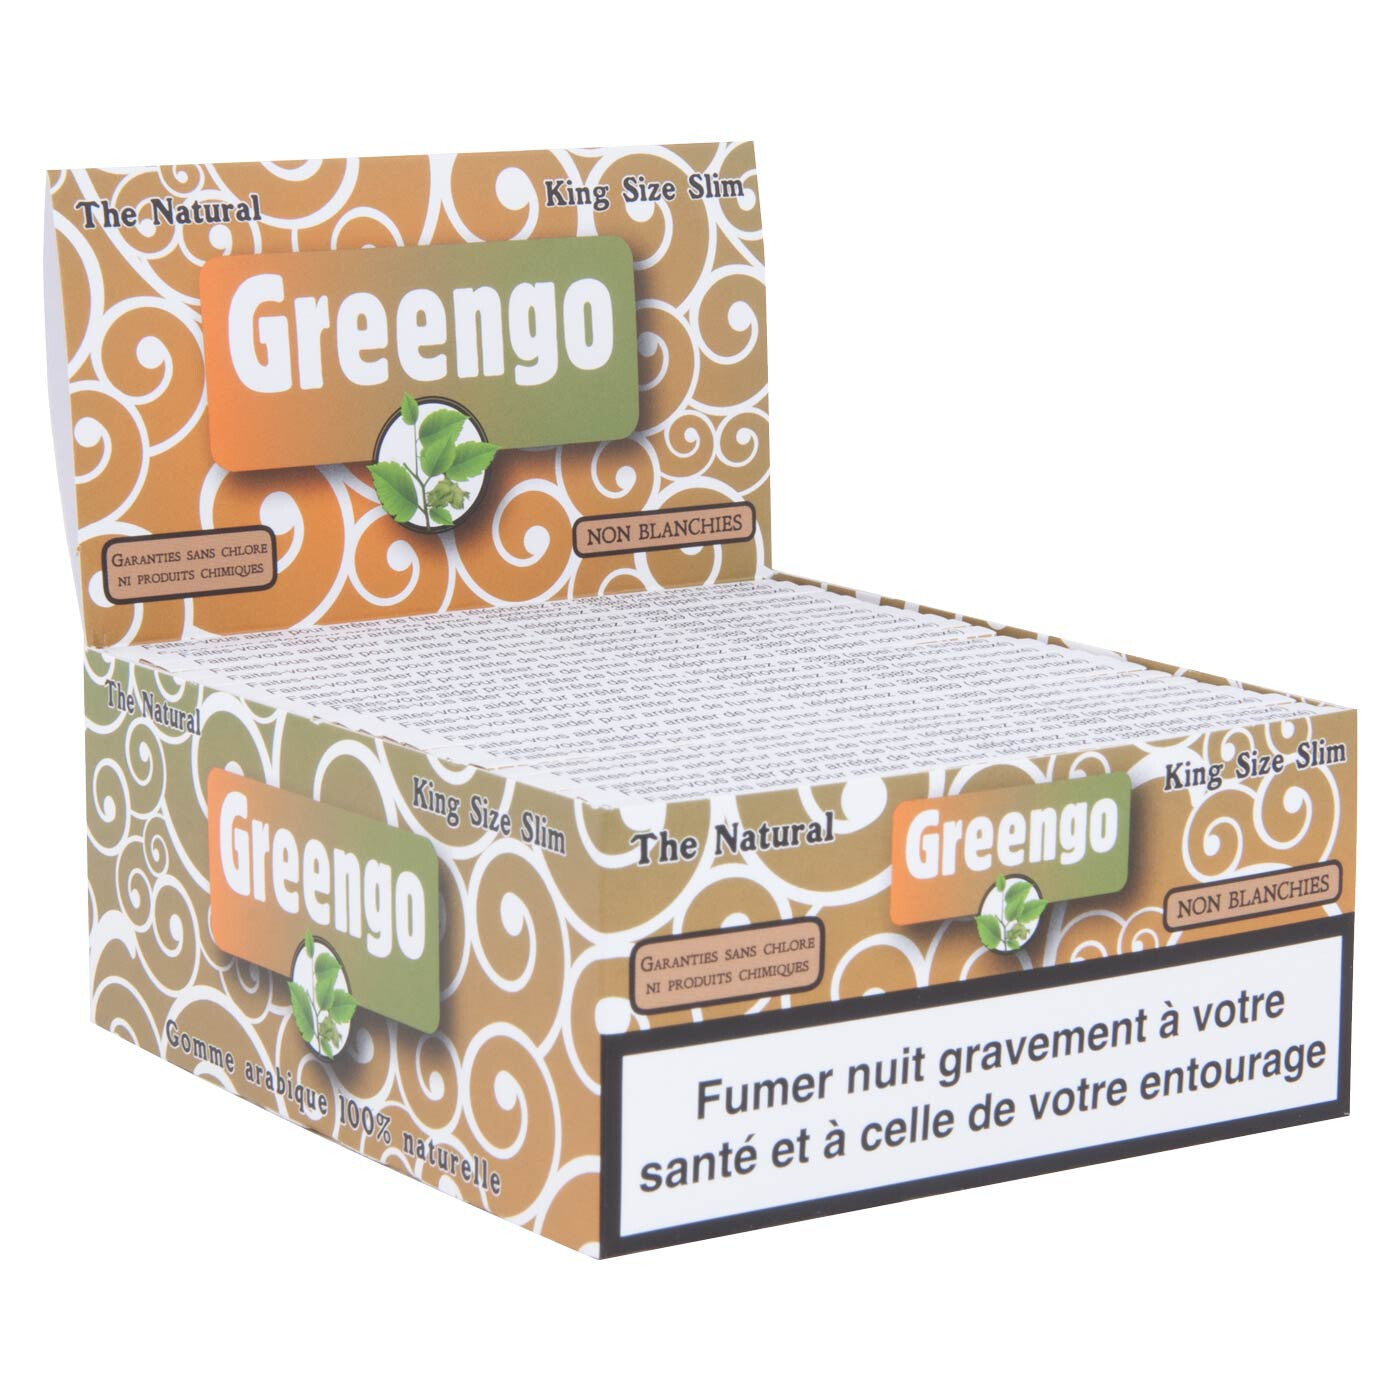 French Display Greengo Unbleached King Size Slim 50 Pcs